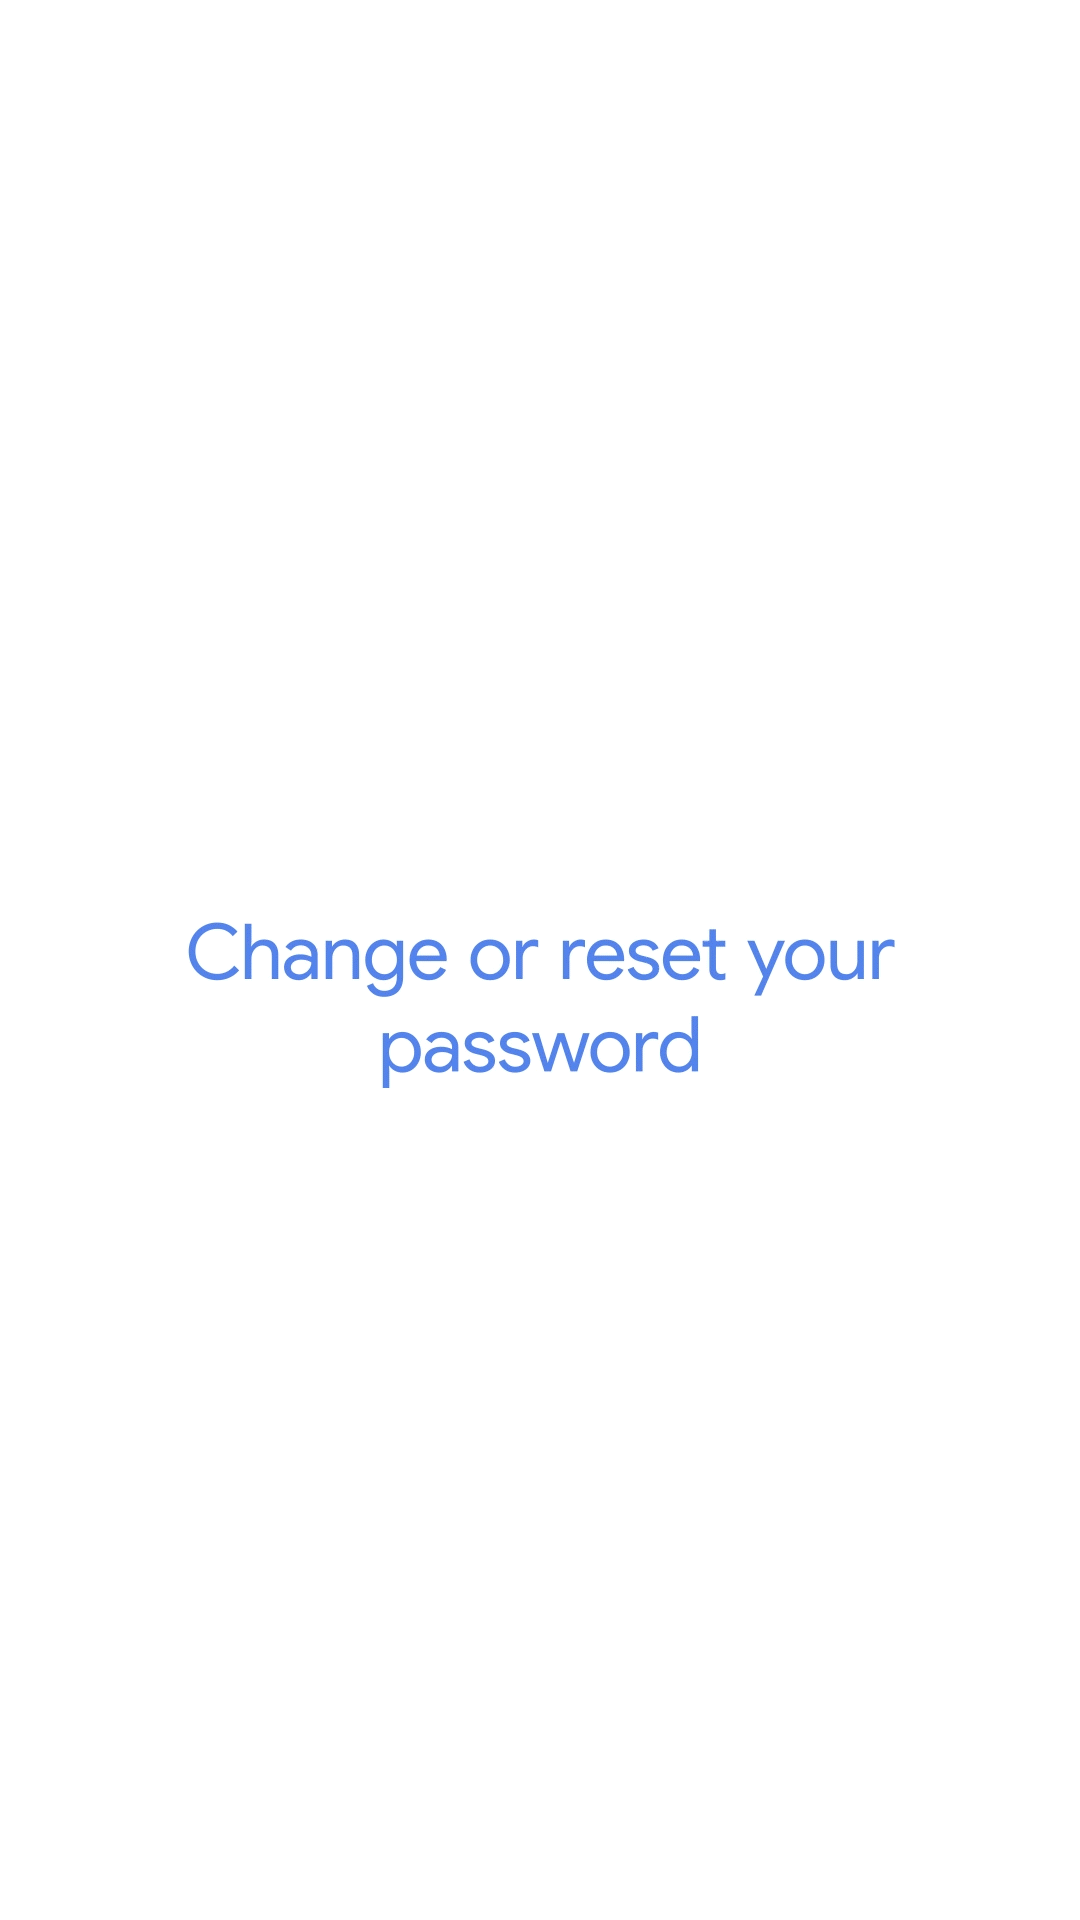 An animation showing how to change or reset your password for your Google Account on iOS